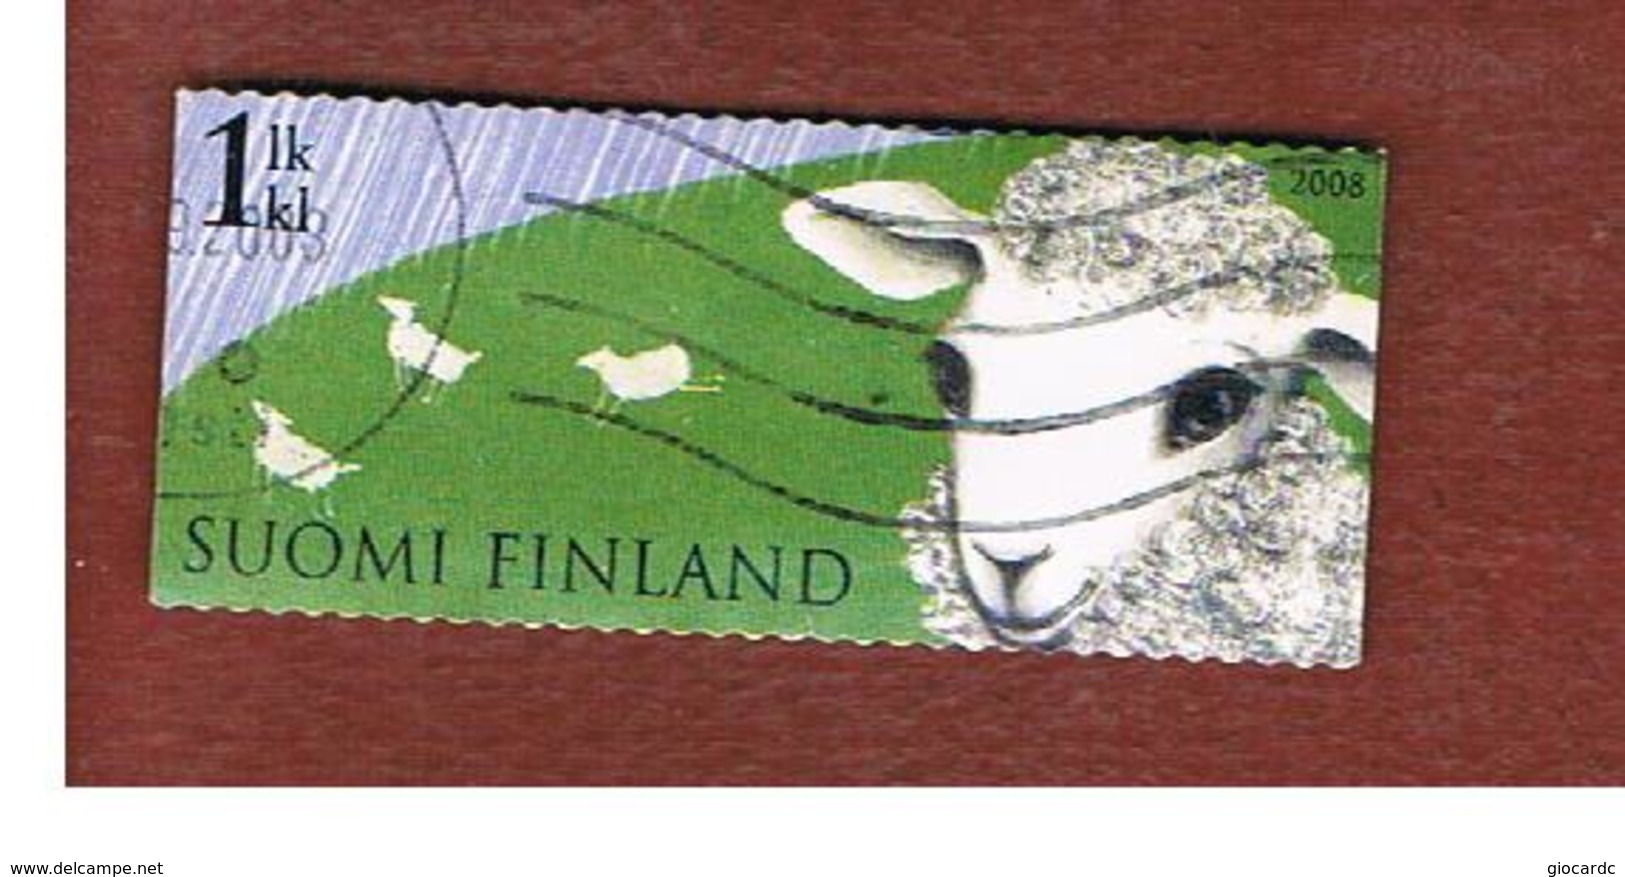 FINLANDIA (FINLAND) -  MI 1899 -  2008  ANIMALS: SHEEP  (FROM BOOKLET)    -       USED ° - Usados